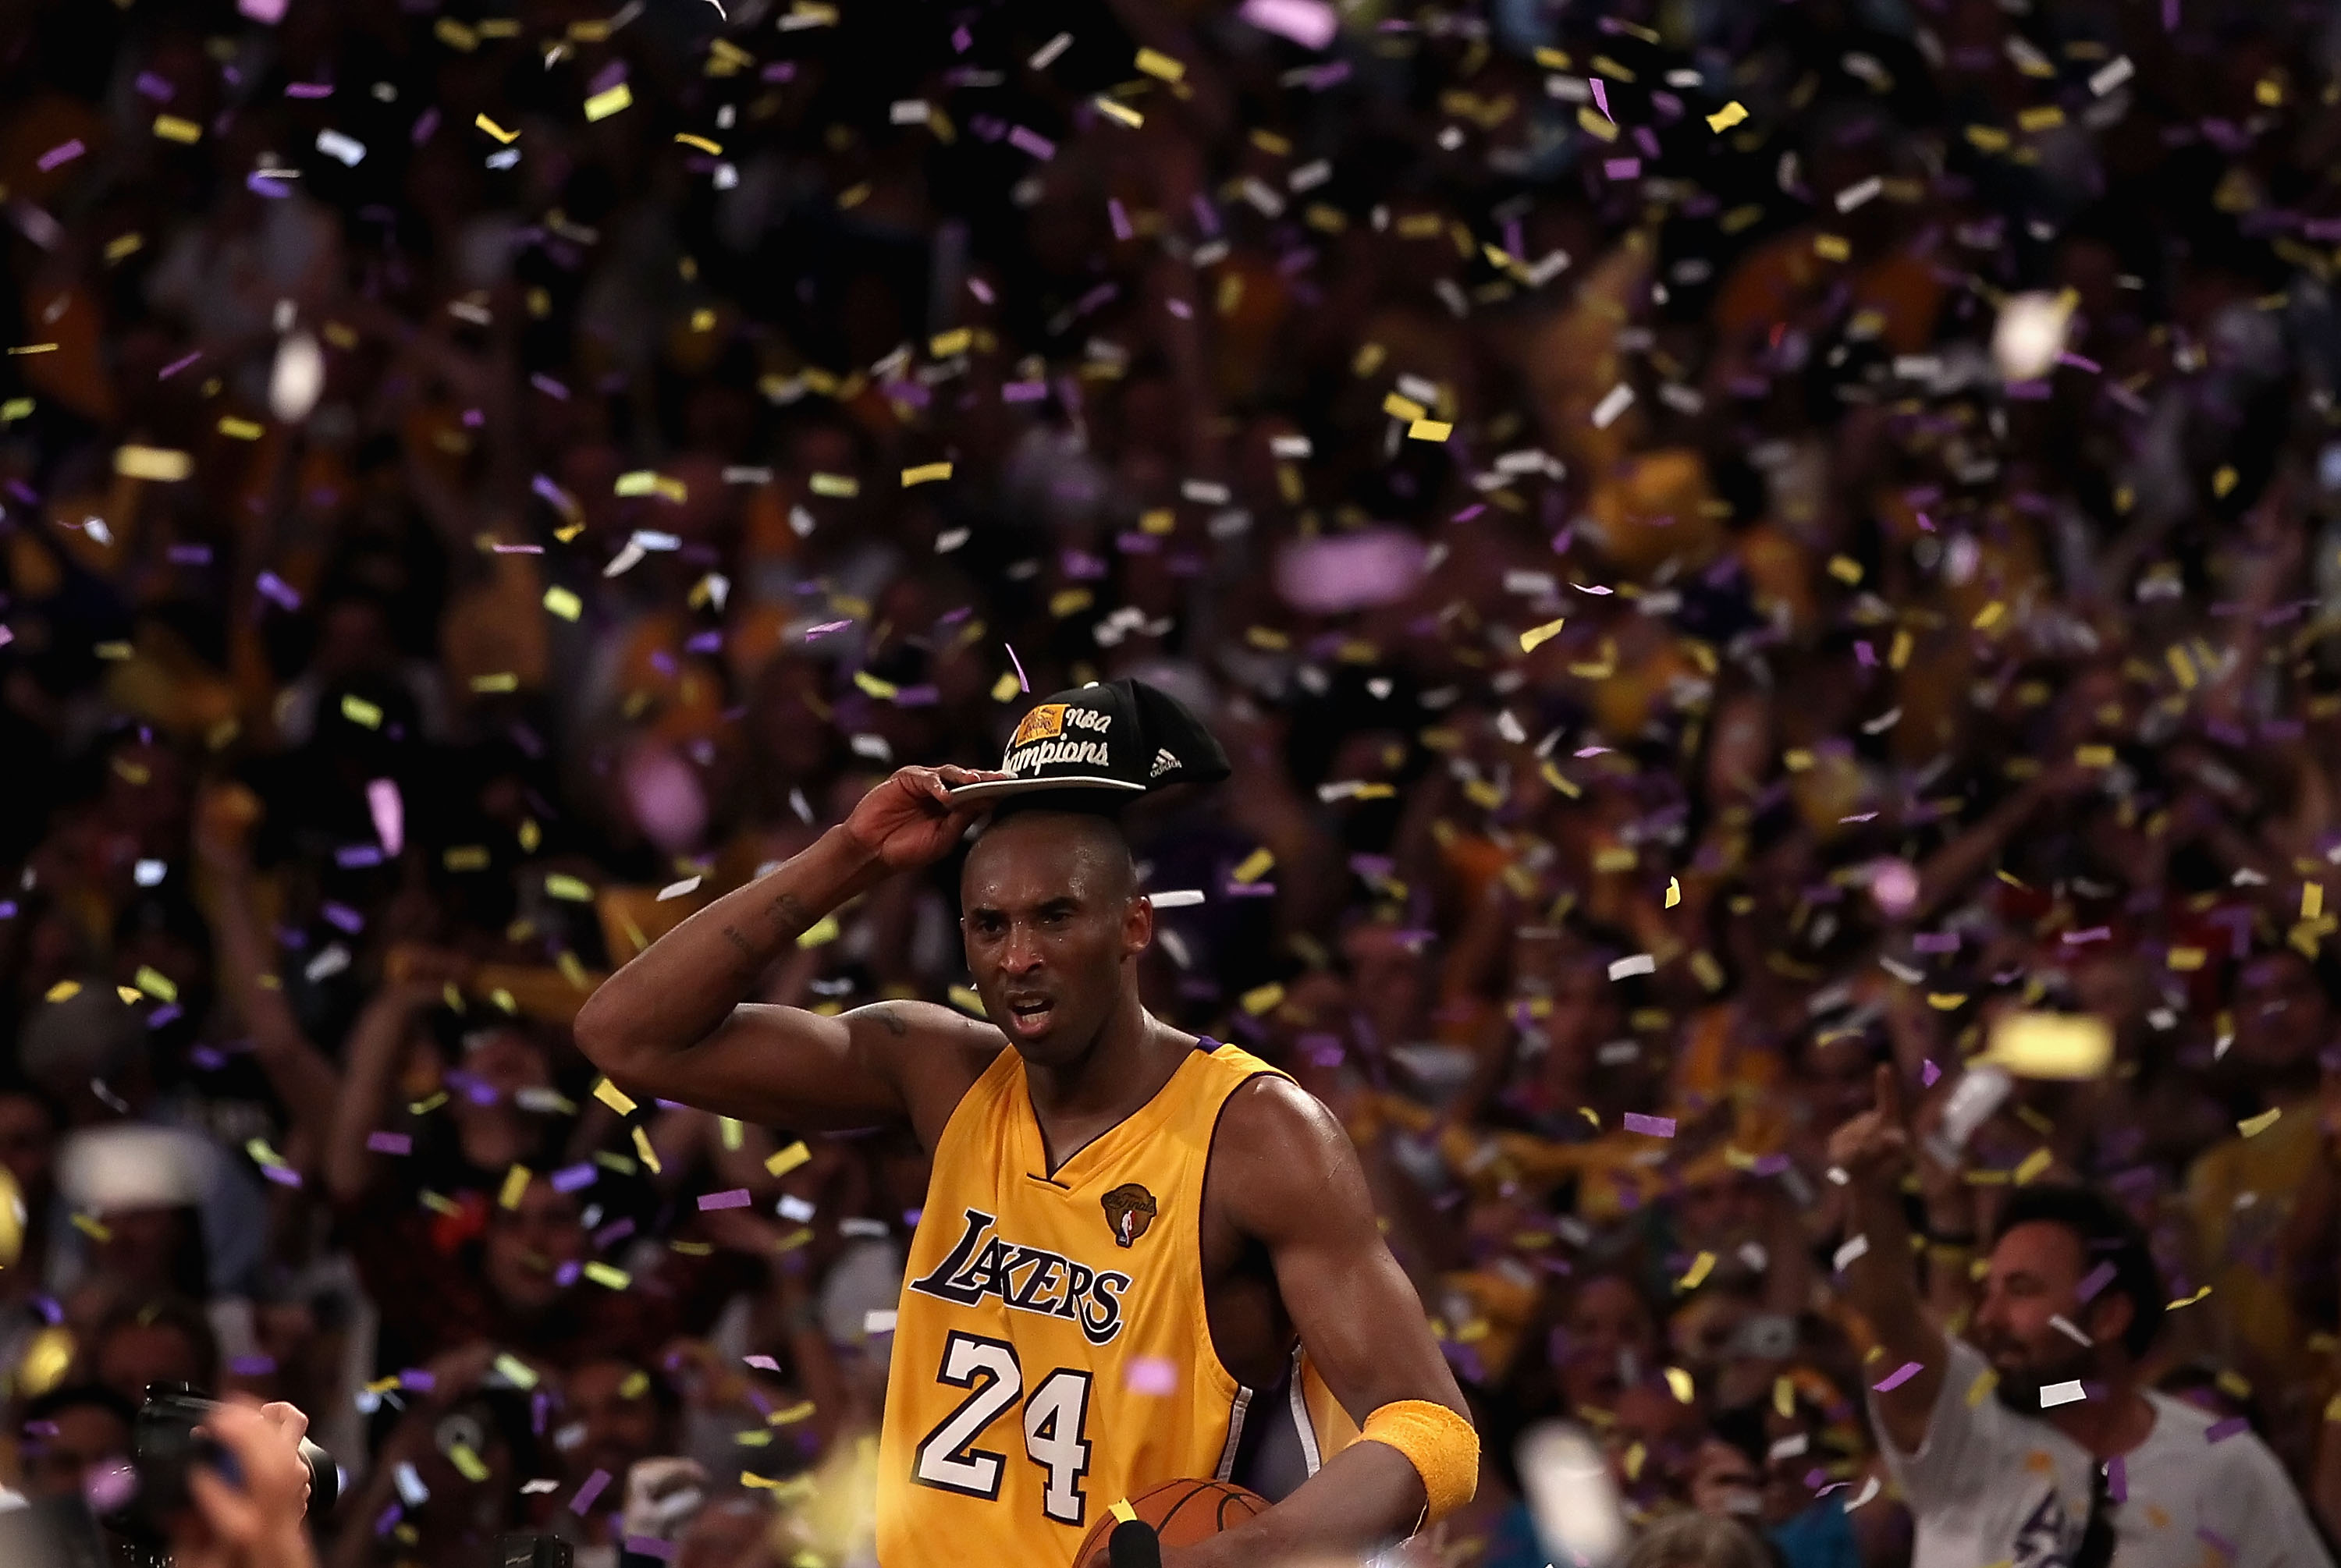 LOS ANGELES, CA - JUNE 17:  Kobe Bryant #24 of the Los Angeles Lakers celebrates after the Lakers defeated the Boston Celtics in Game Seven of the 2010 NBA Finals at Staples Center on June 17, 2010 in Los Angeles, California. The Lakers defeated the Celti